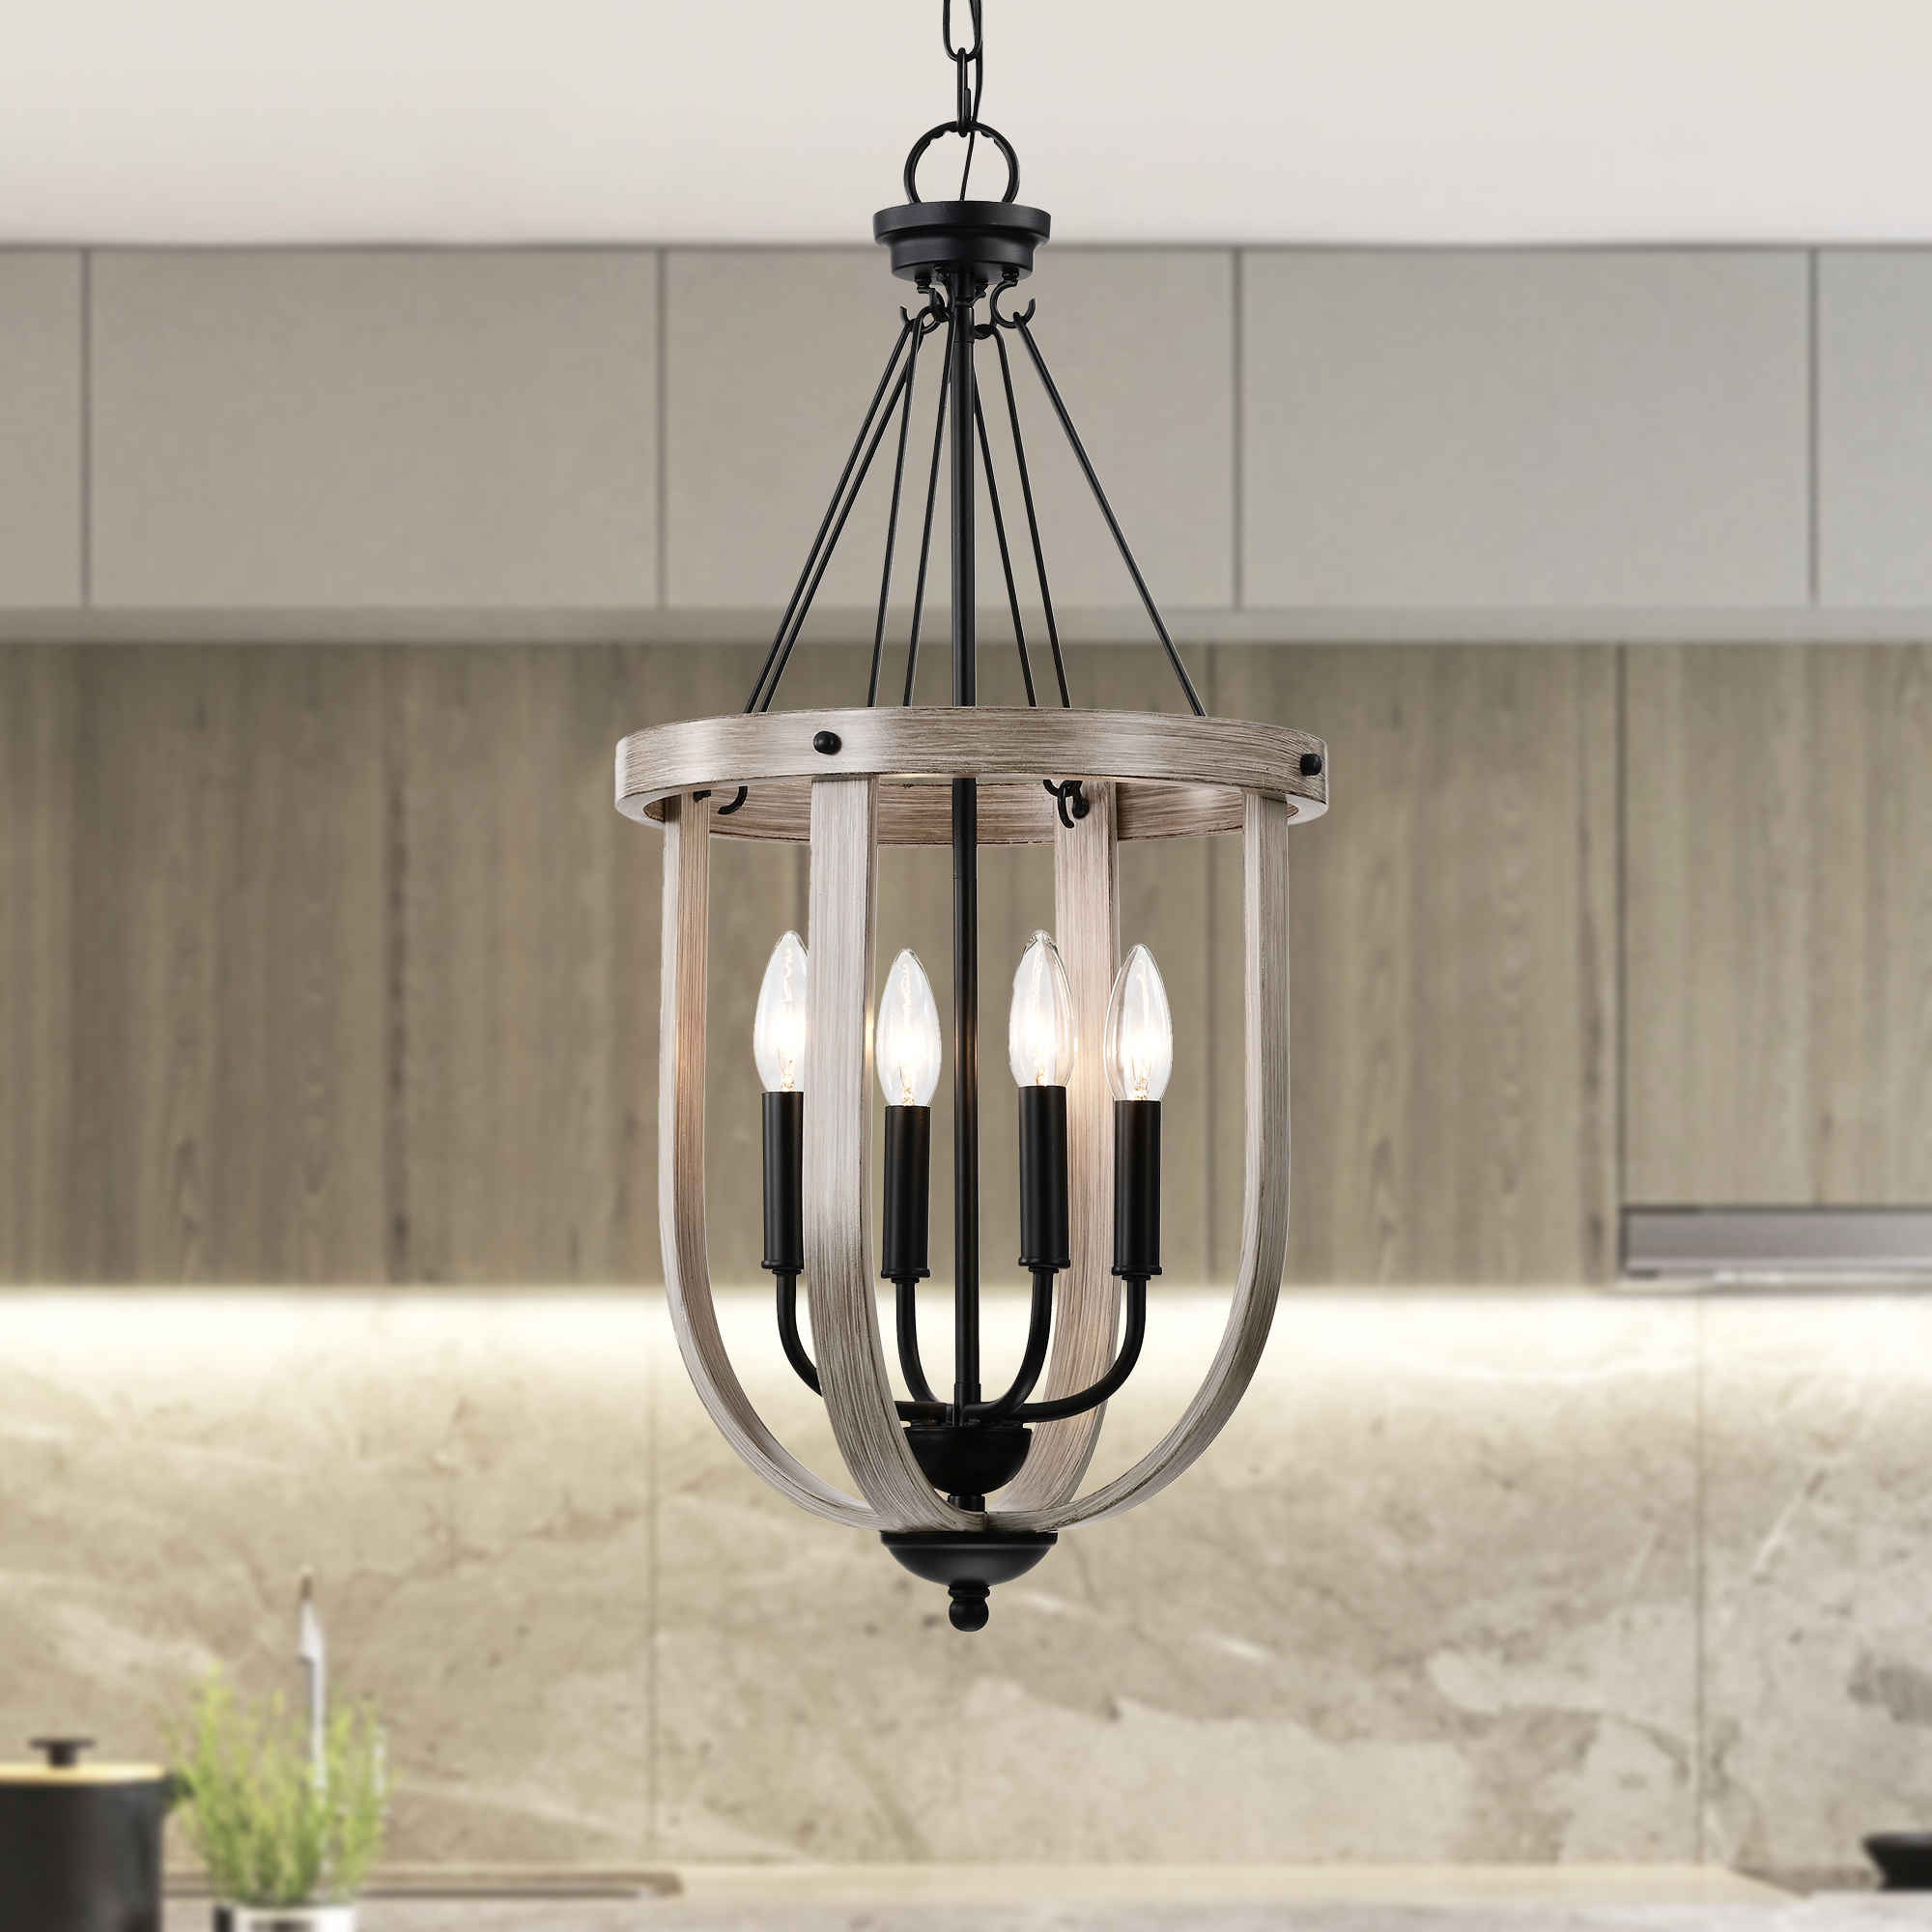 Giano 14 in. 4-Light Indoor Matte Black and Faux Wood Grain Finish Chandelier with Light Kit